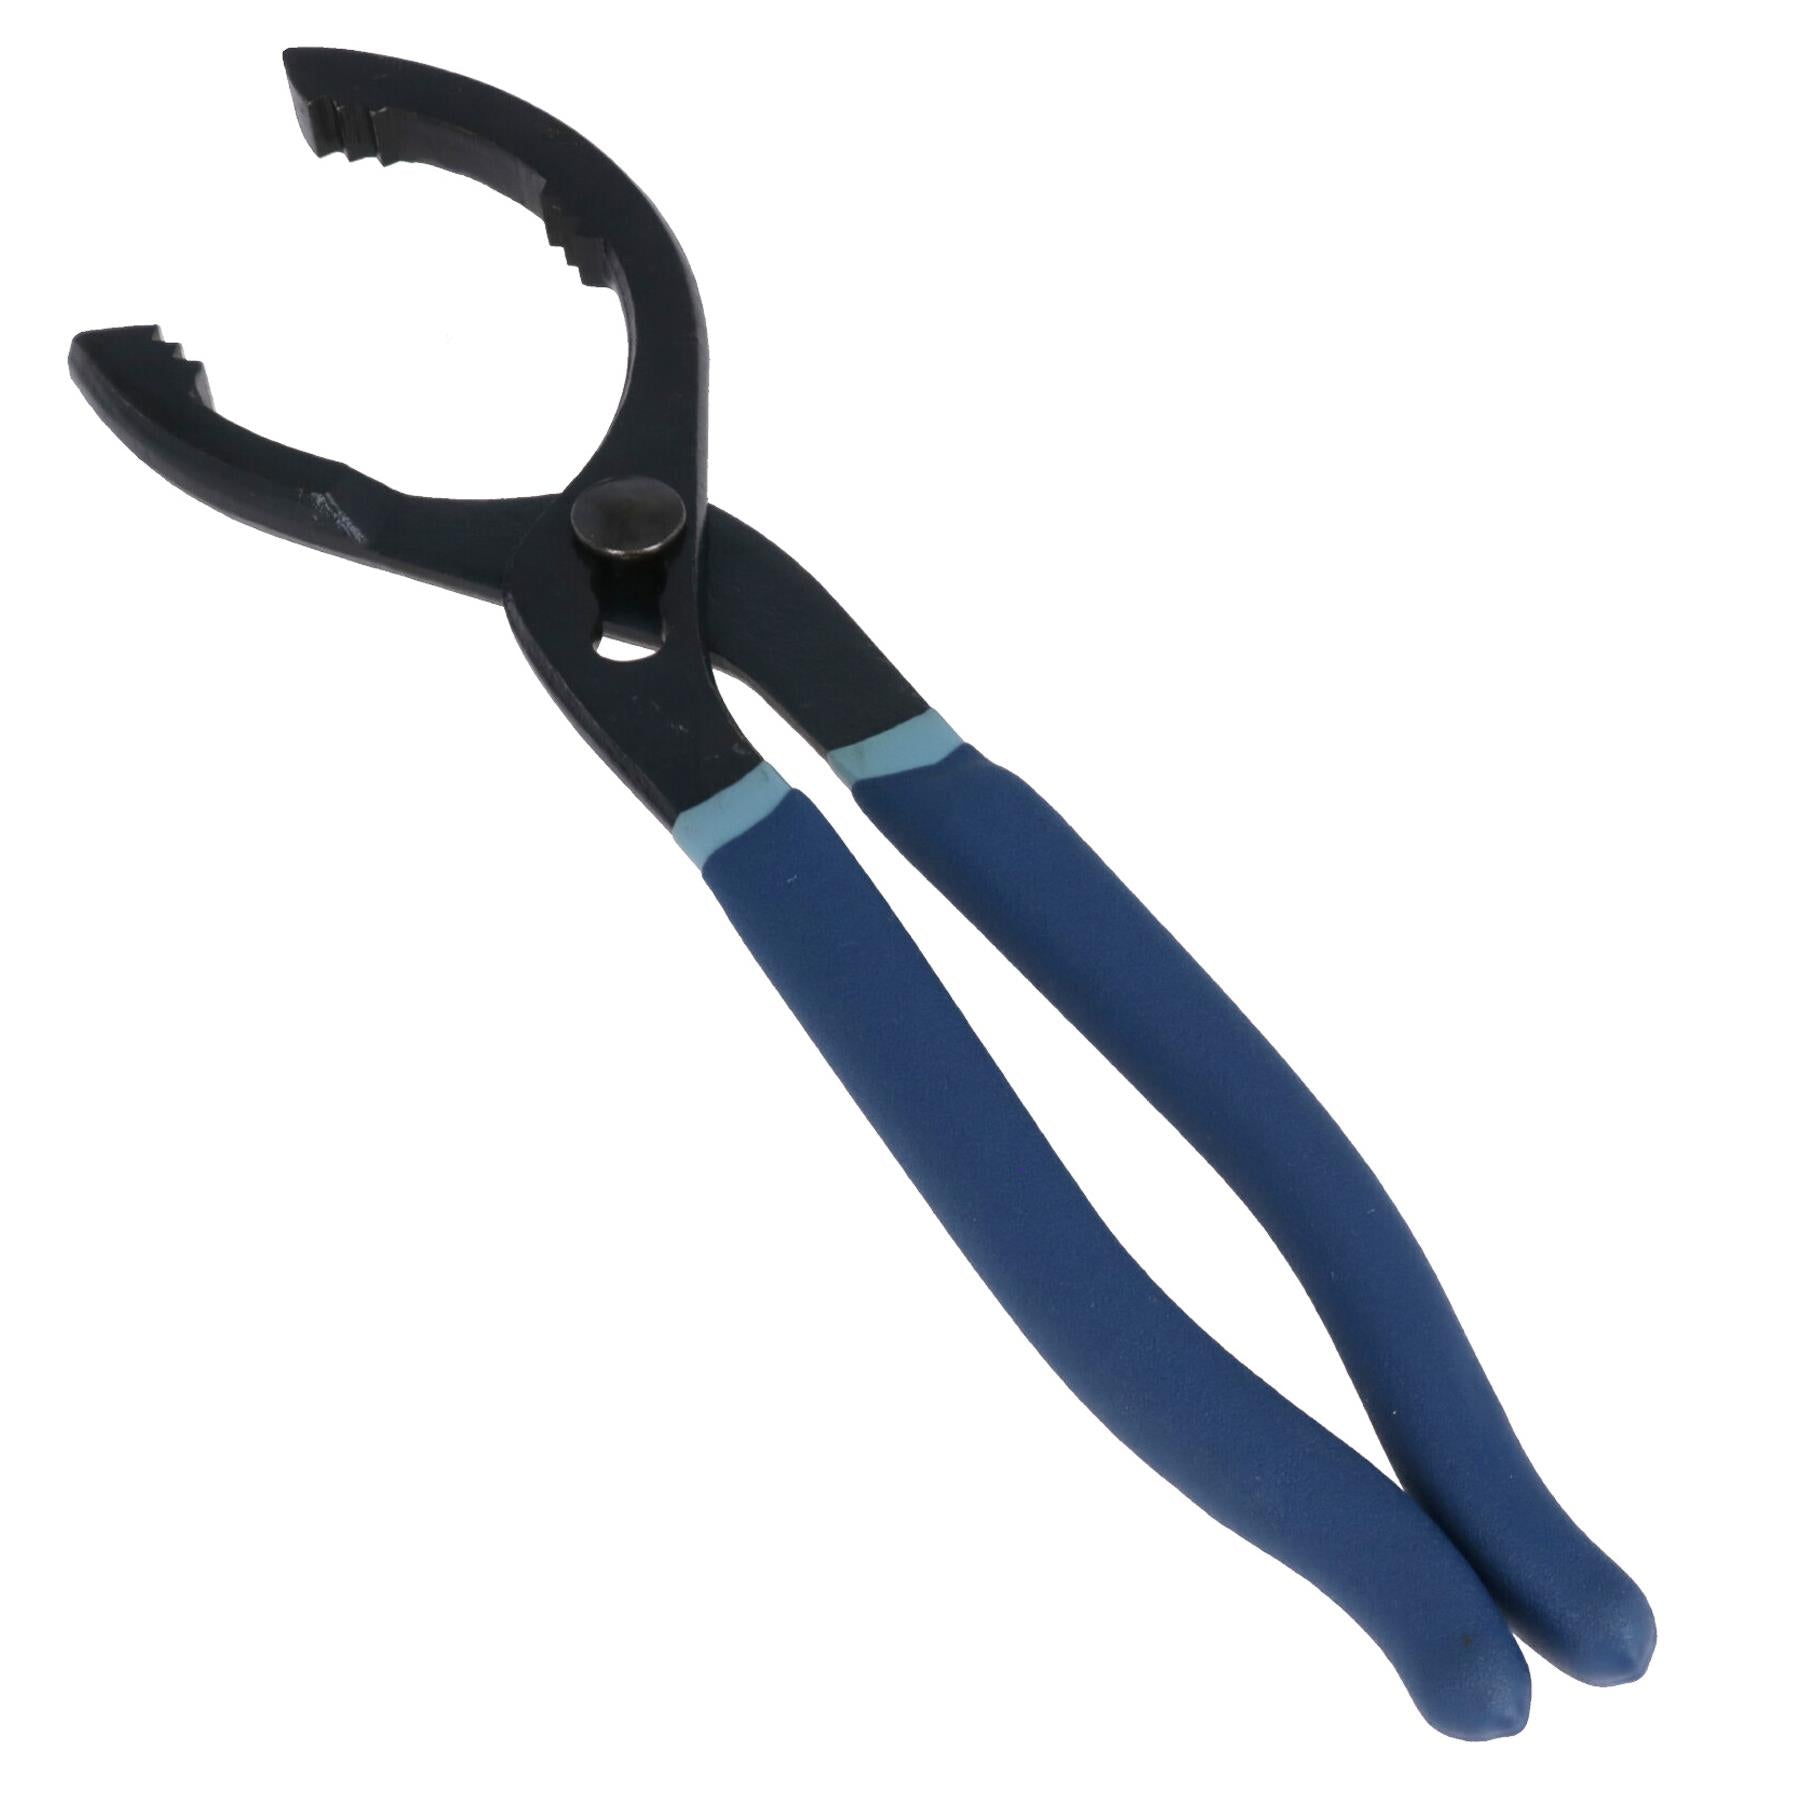 12" adjustable Oil filter wrench / pliers / remover from 60mm to 115mm TE017